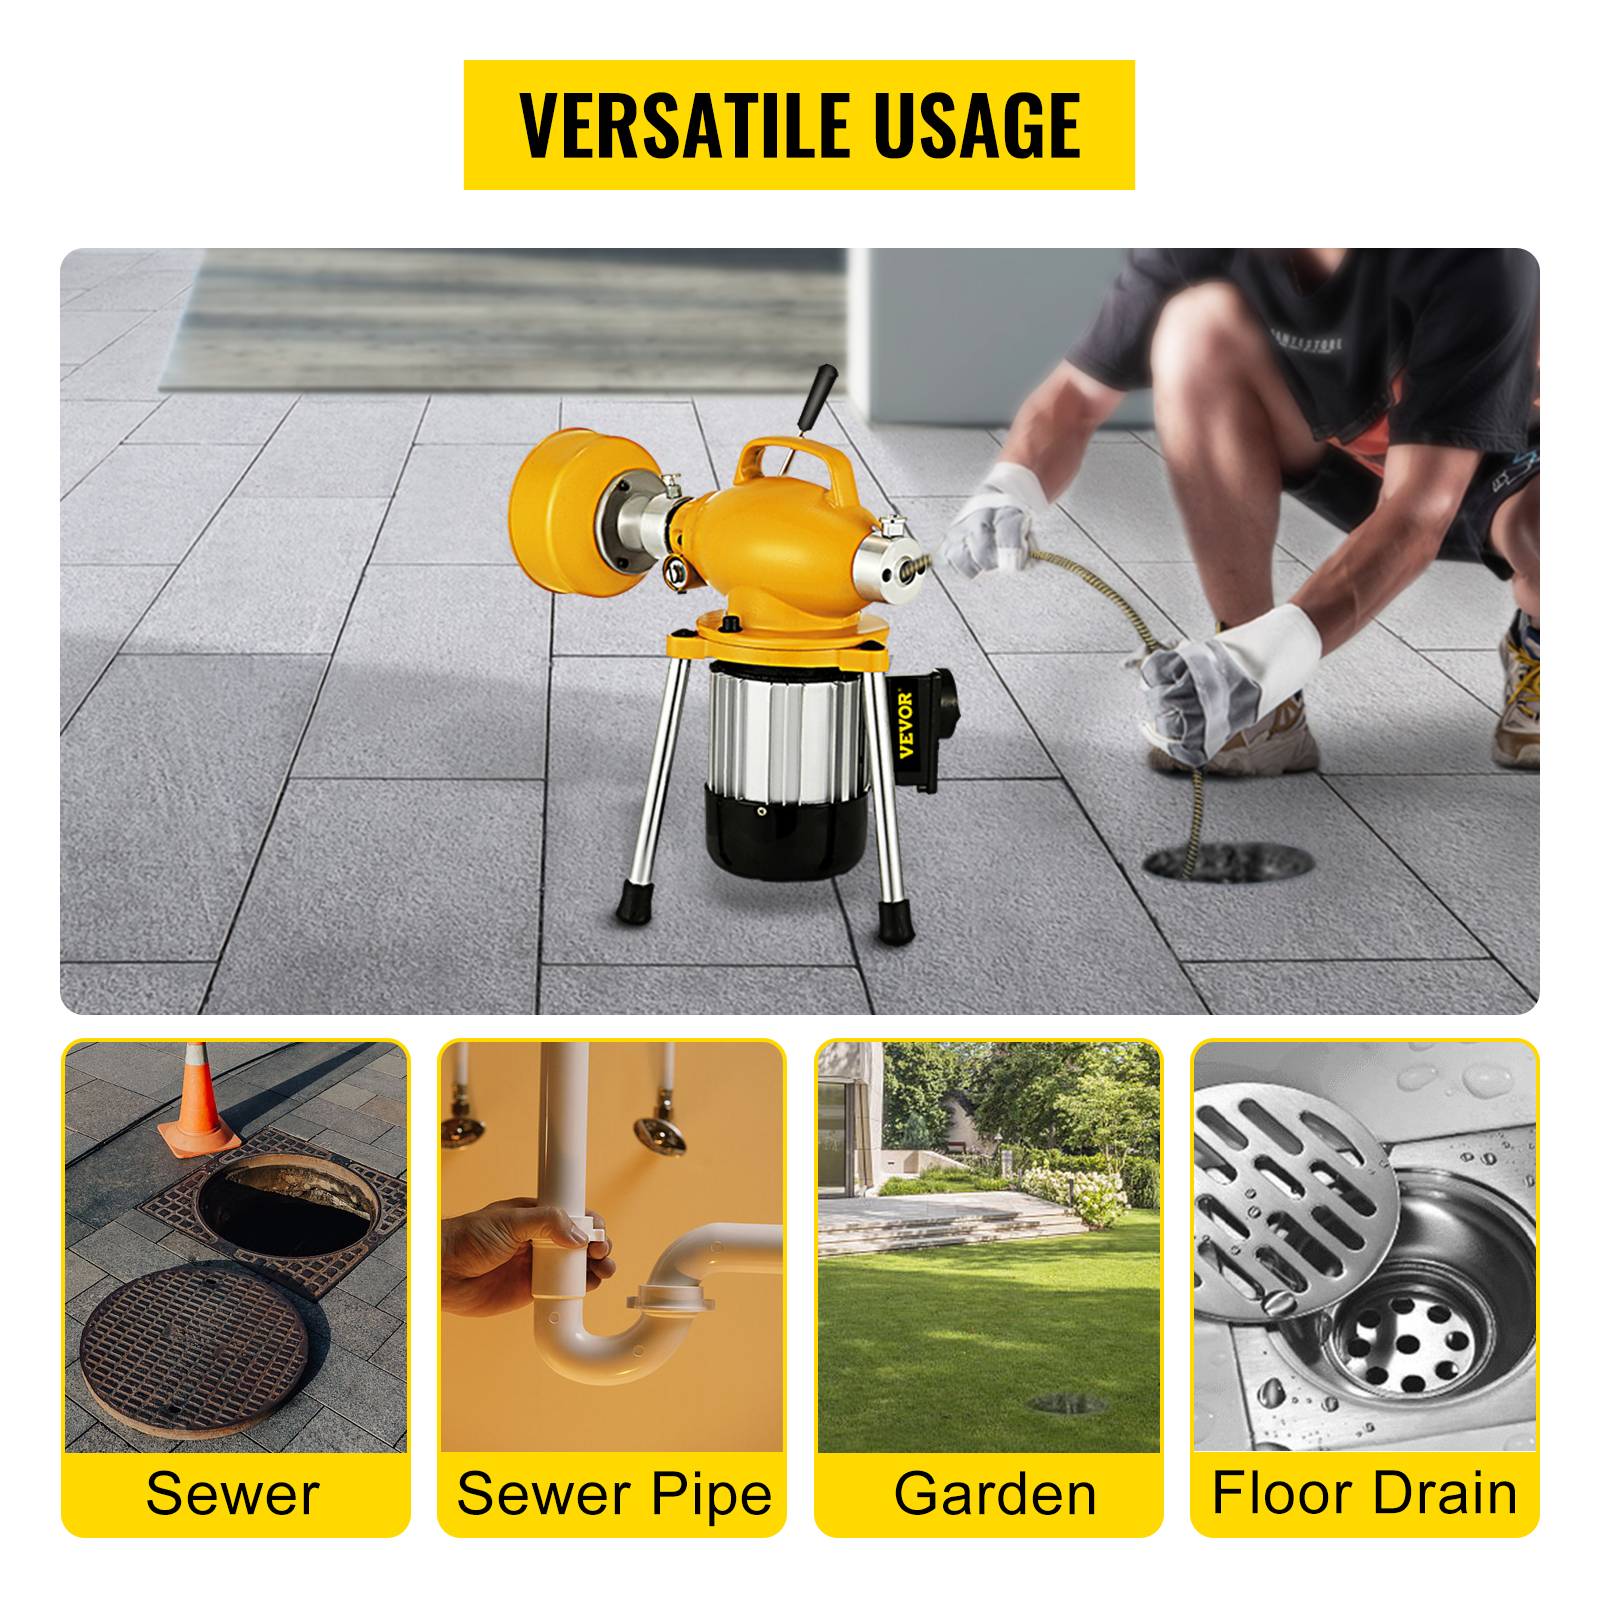 VEVOR Dredge Machine 400W Professional Electric Pipe Plunger Cleaning Tools for Unclogging Sewer and Toilet Sink Pipes